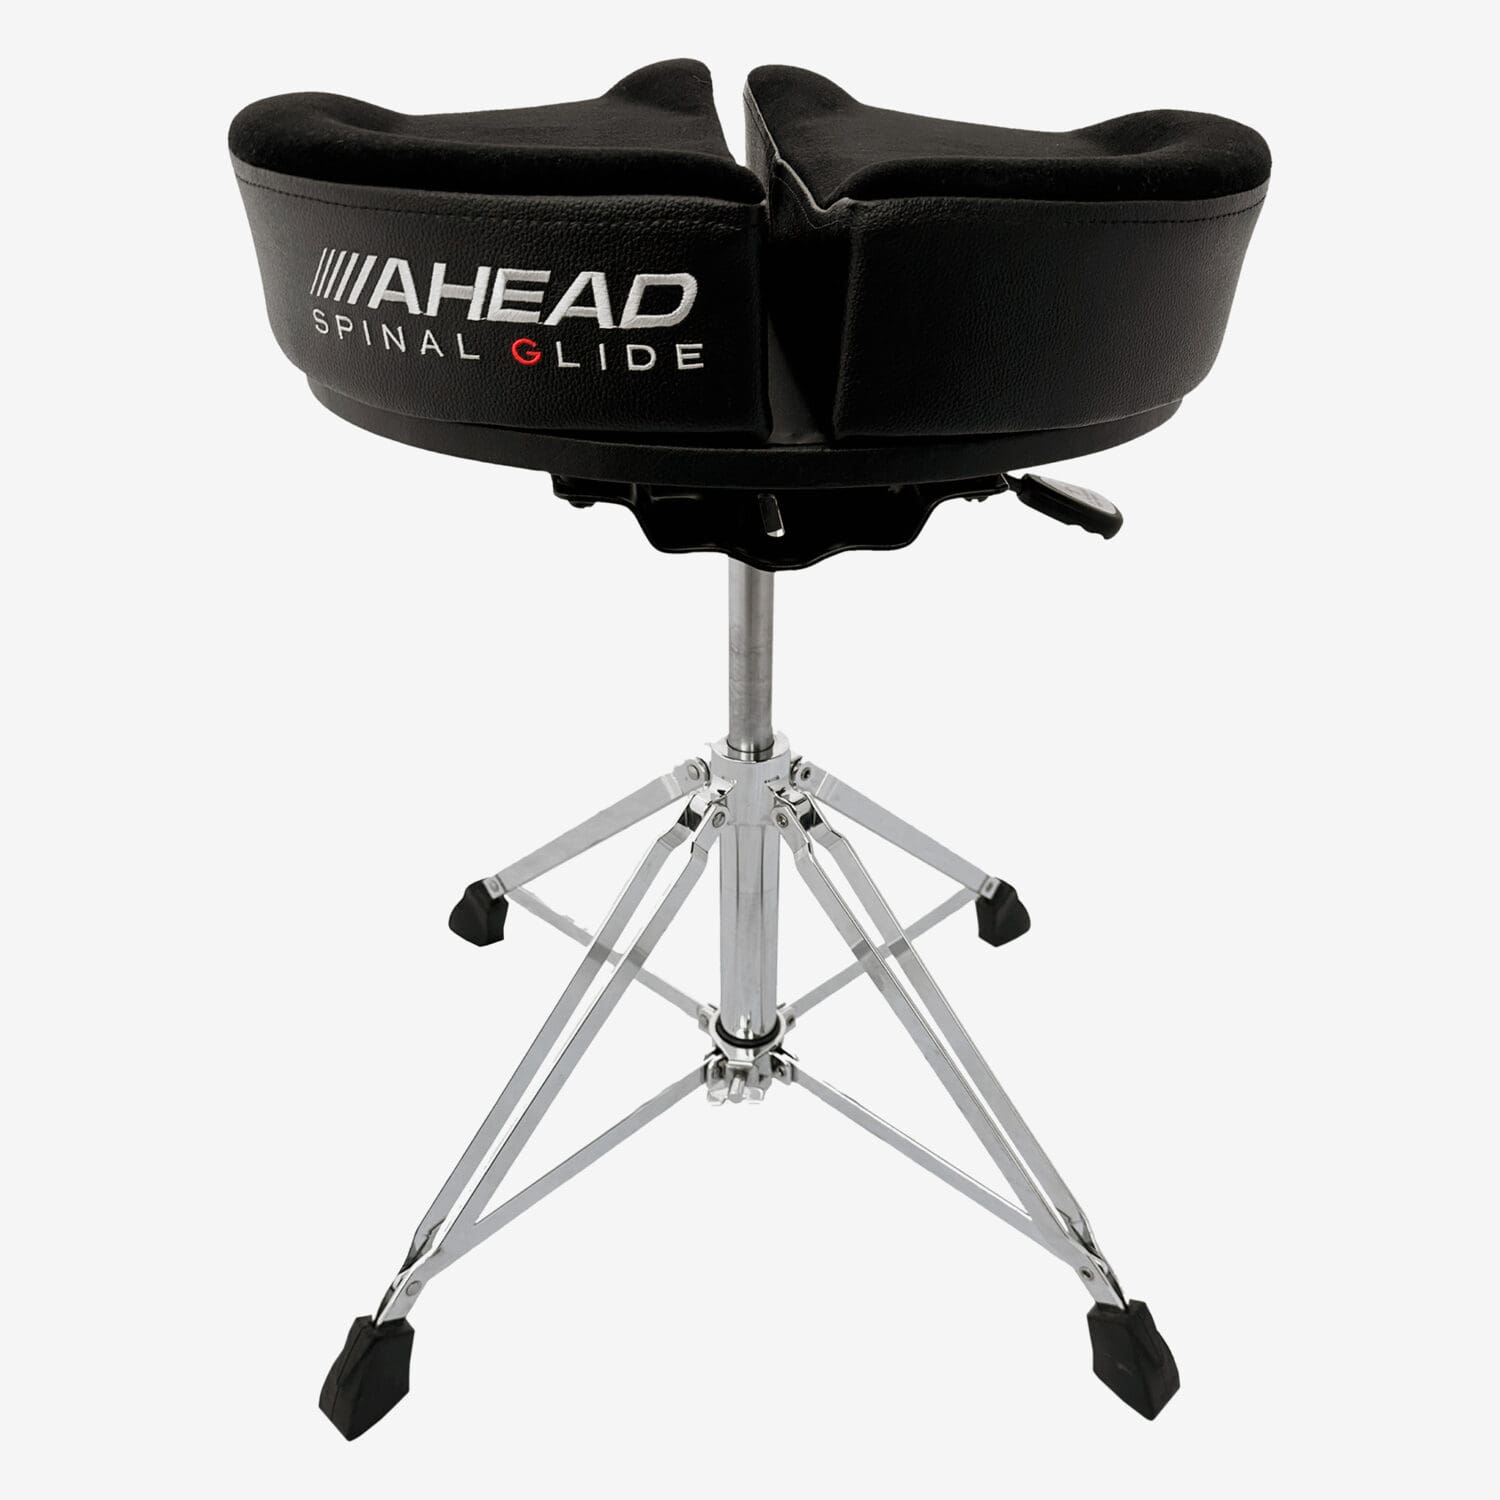 Spinal-G Saddle Top Hydraulic Throne